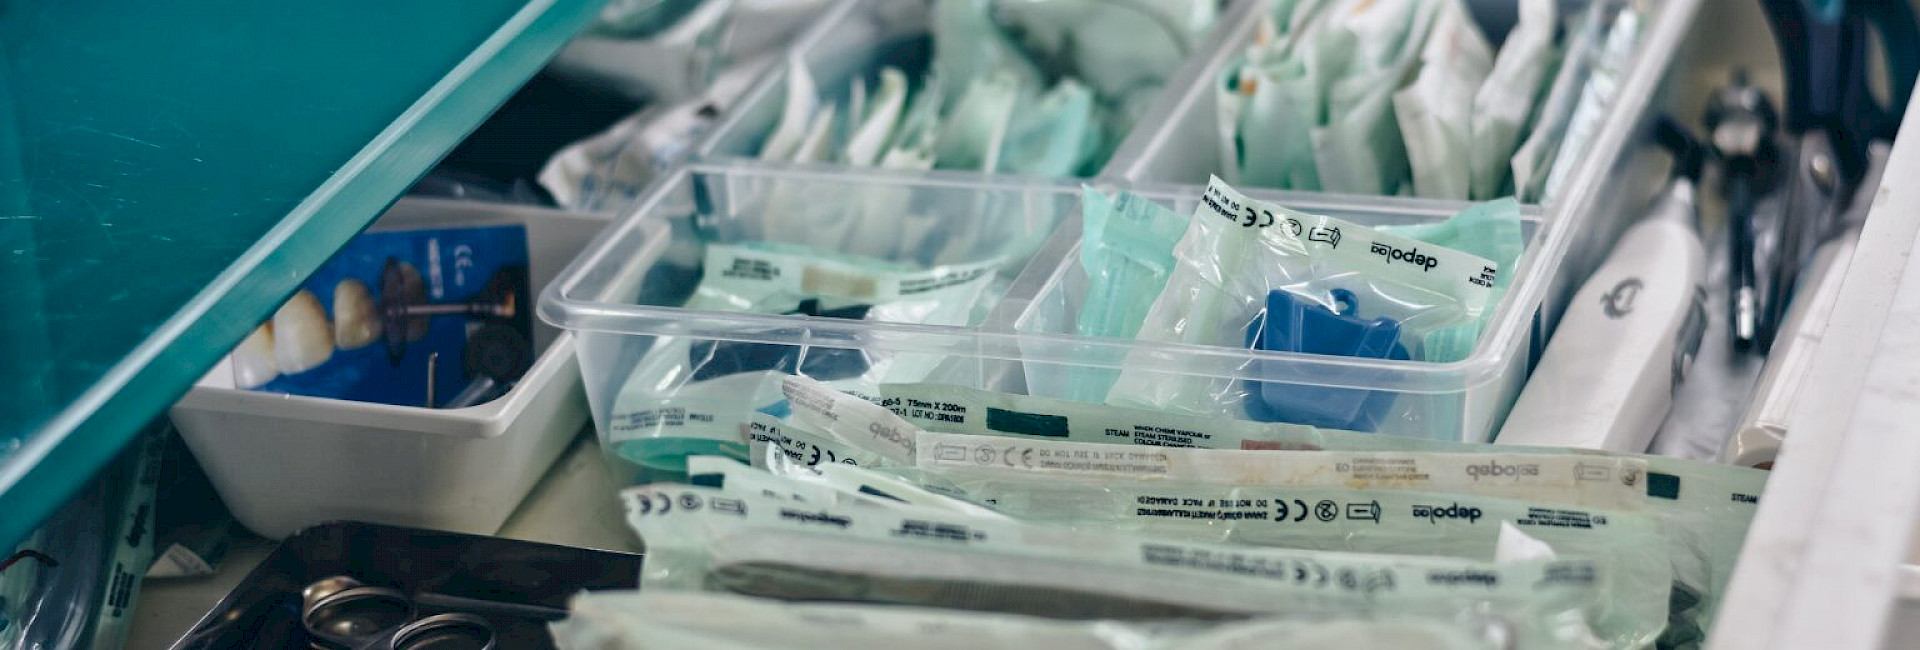 Sterile medical devices in a drawer